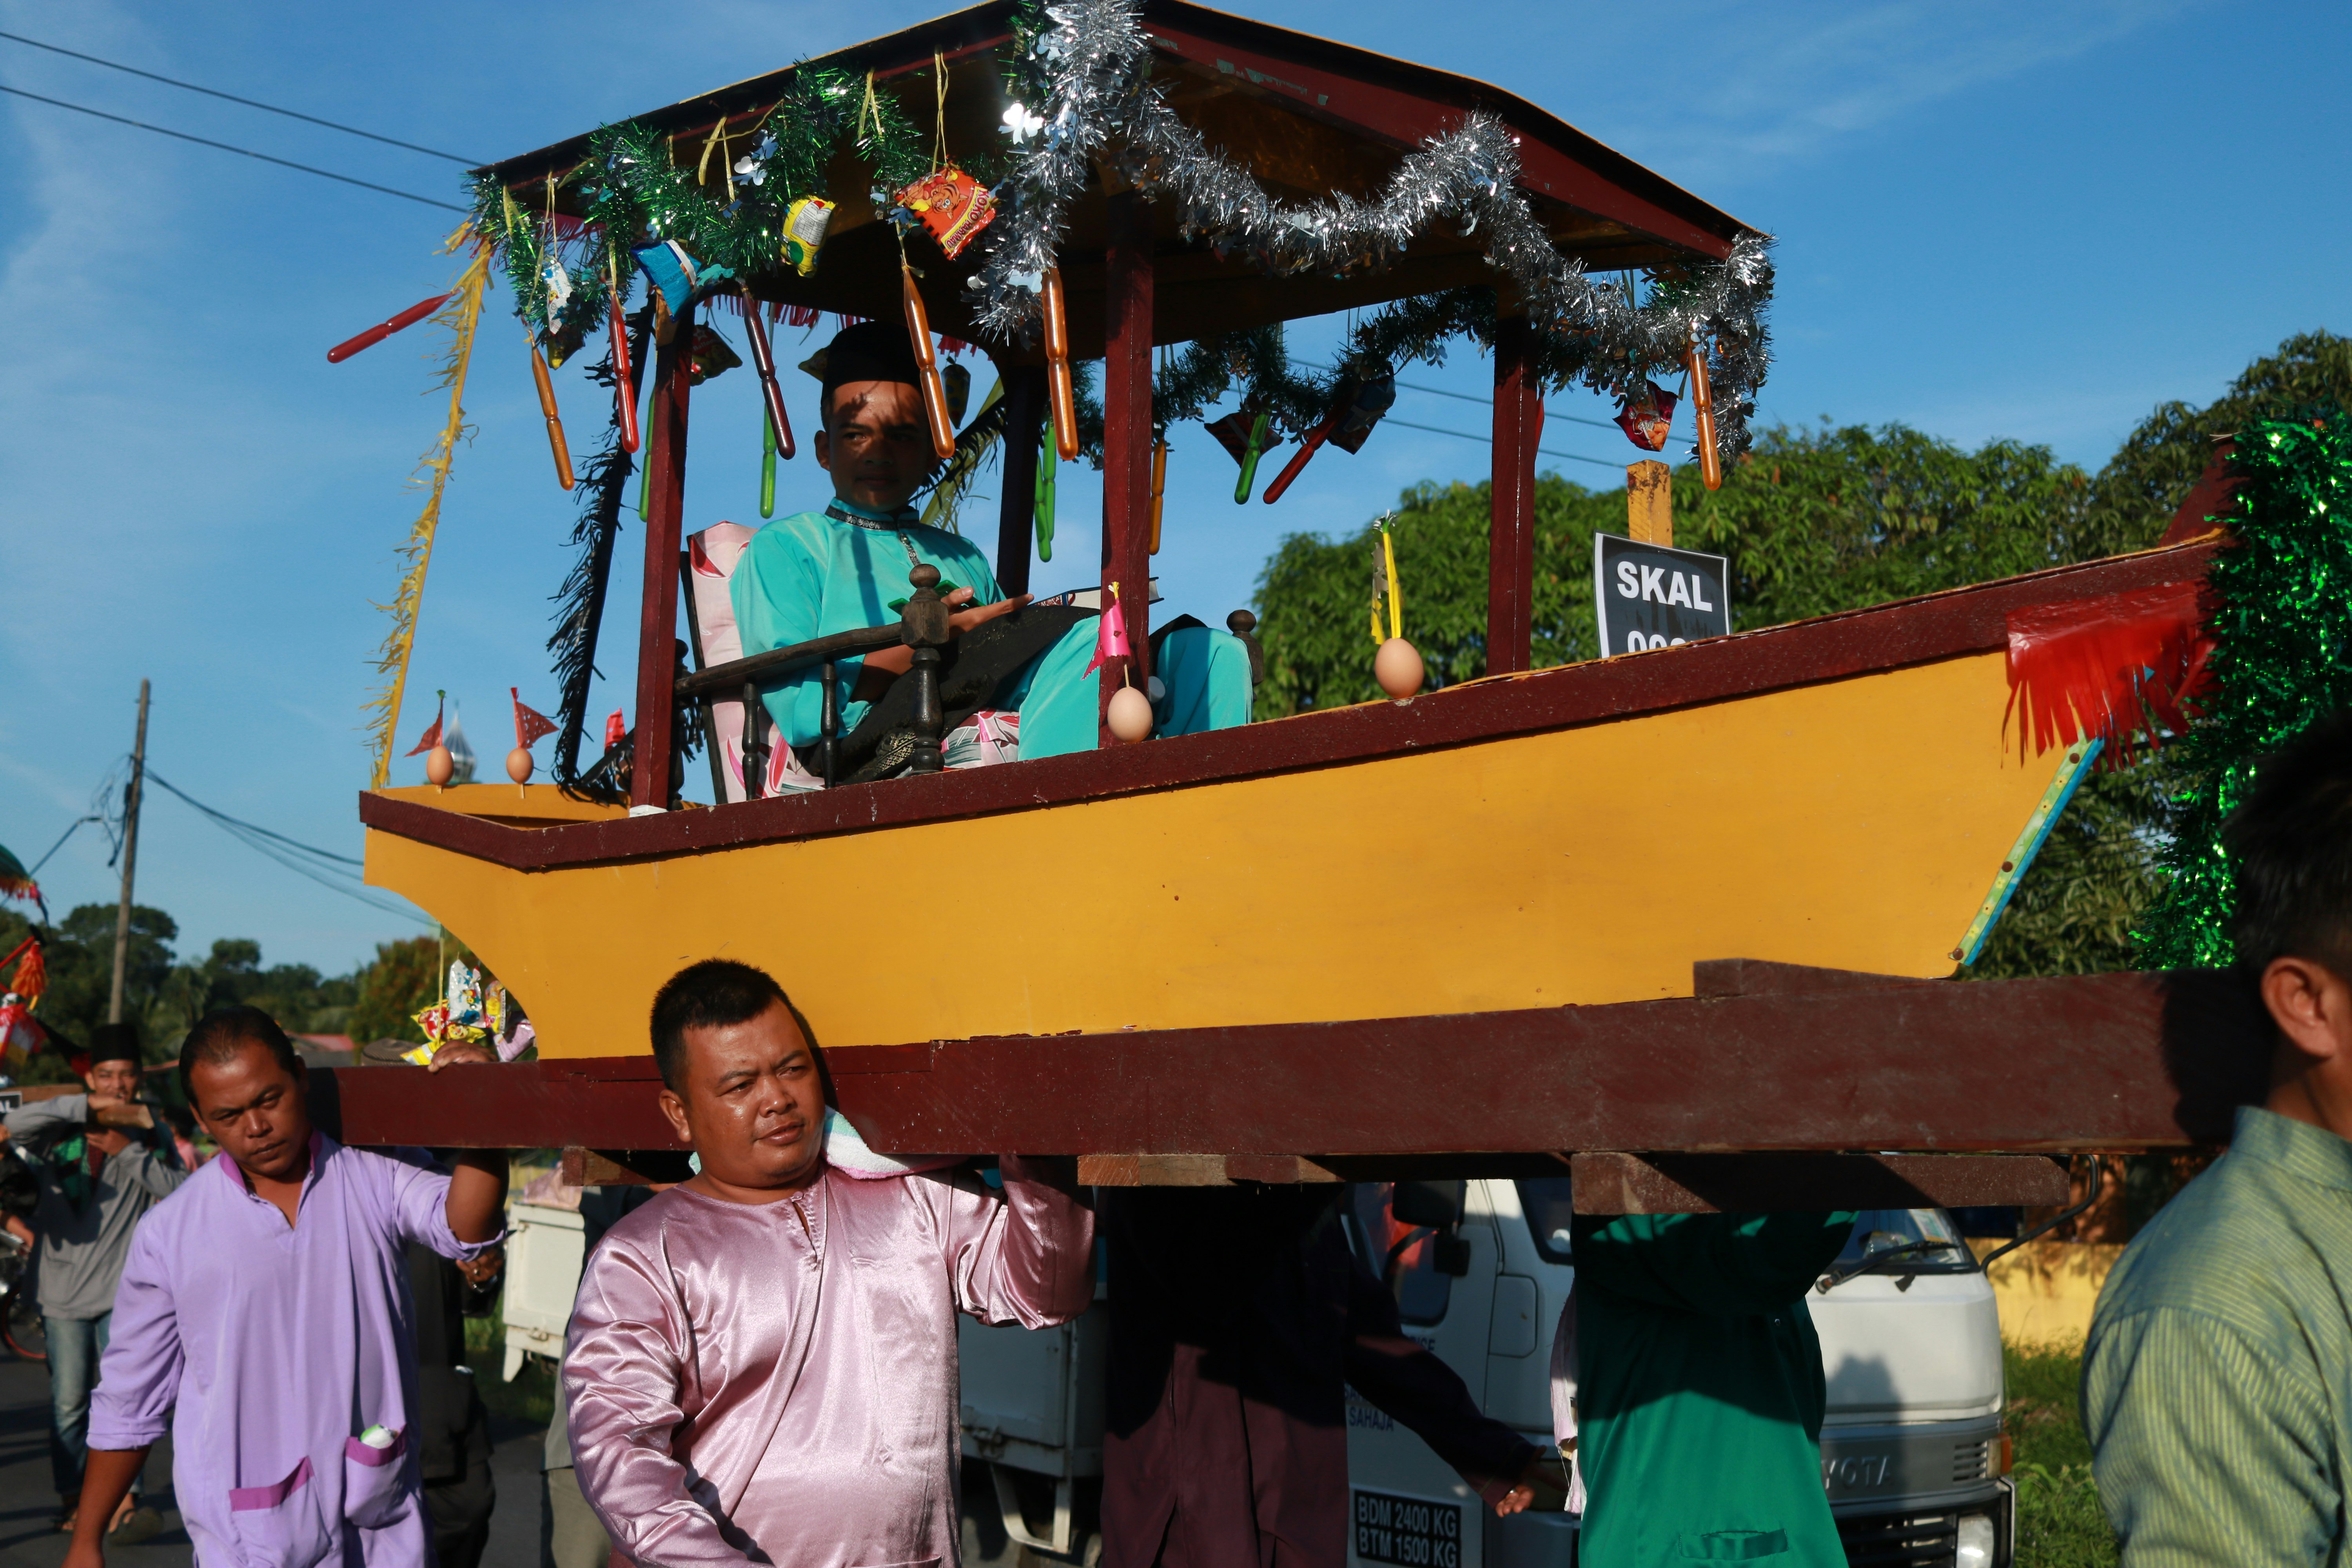 Men carrying a yellow boat decoated with silver tinsel. In the boat is a person seated and dressed in green.